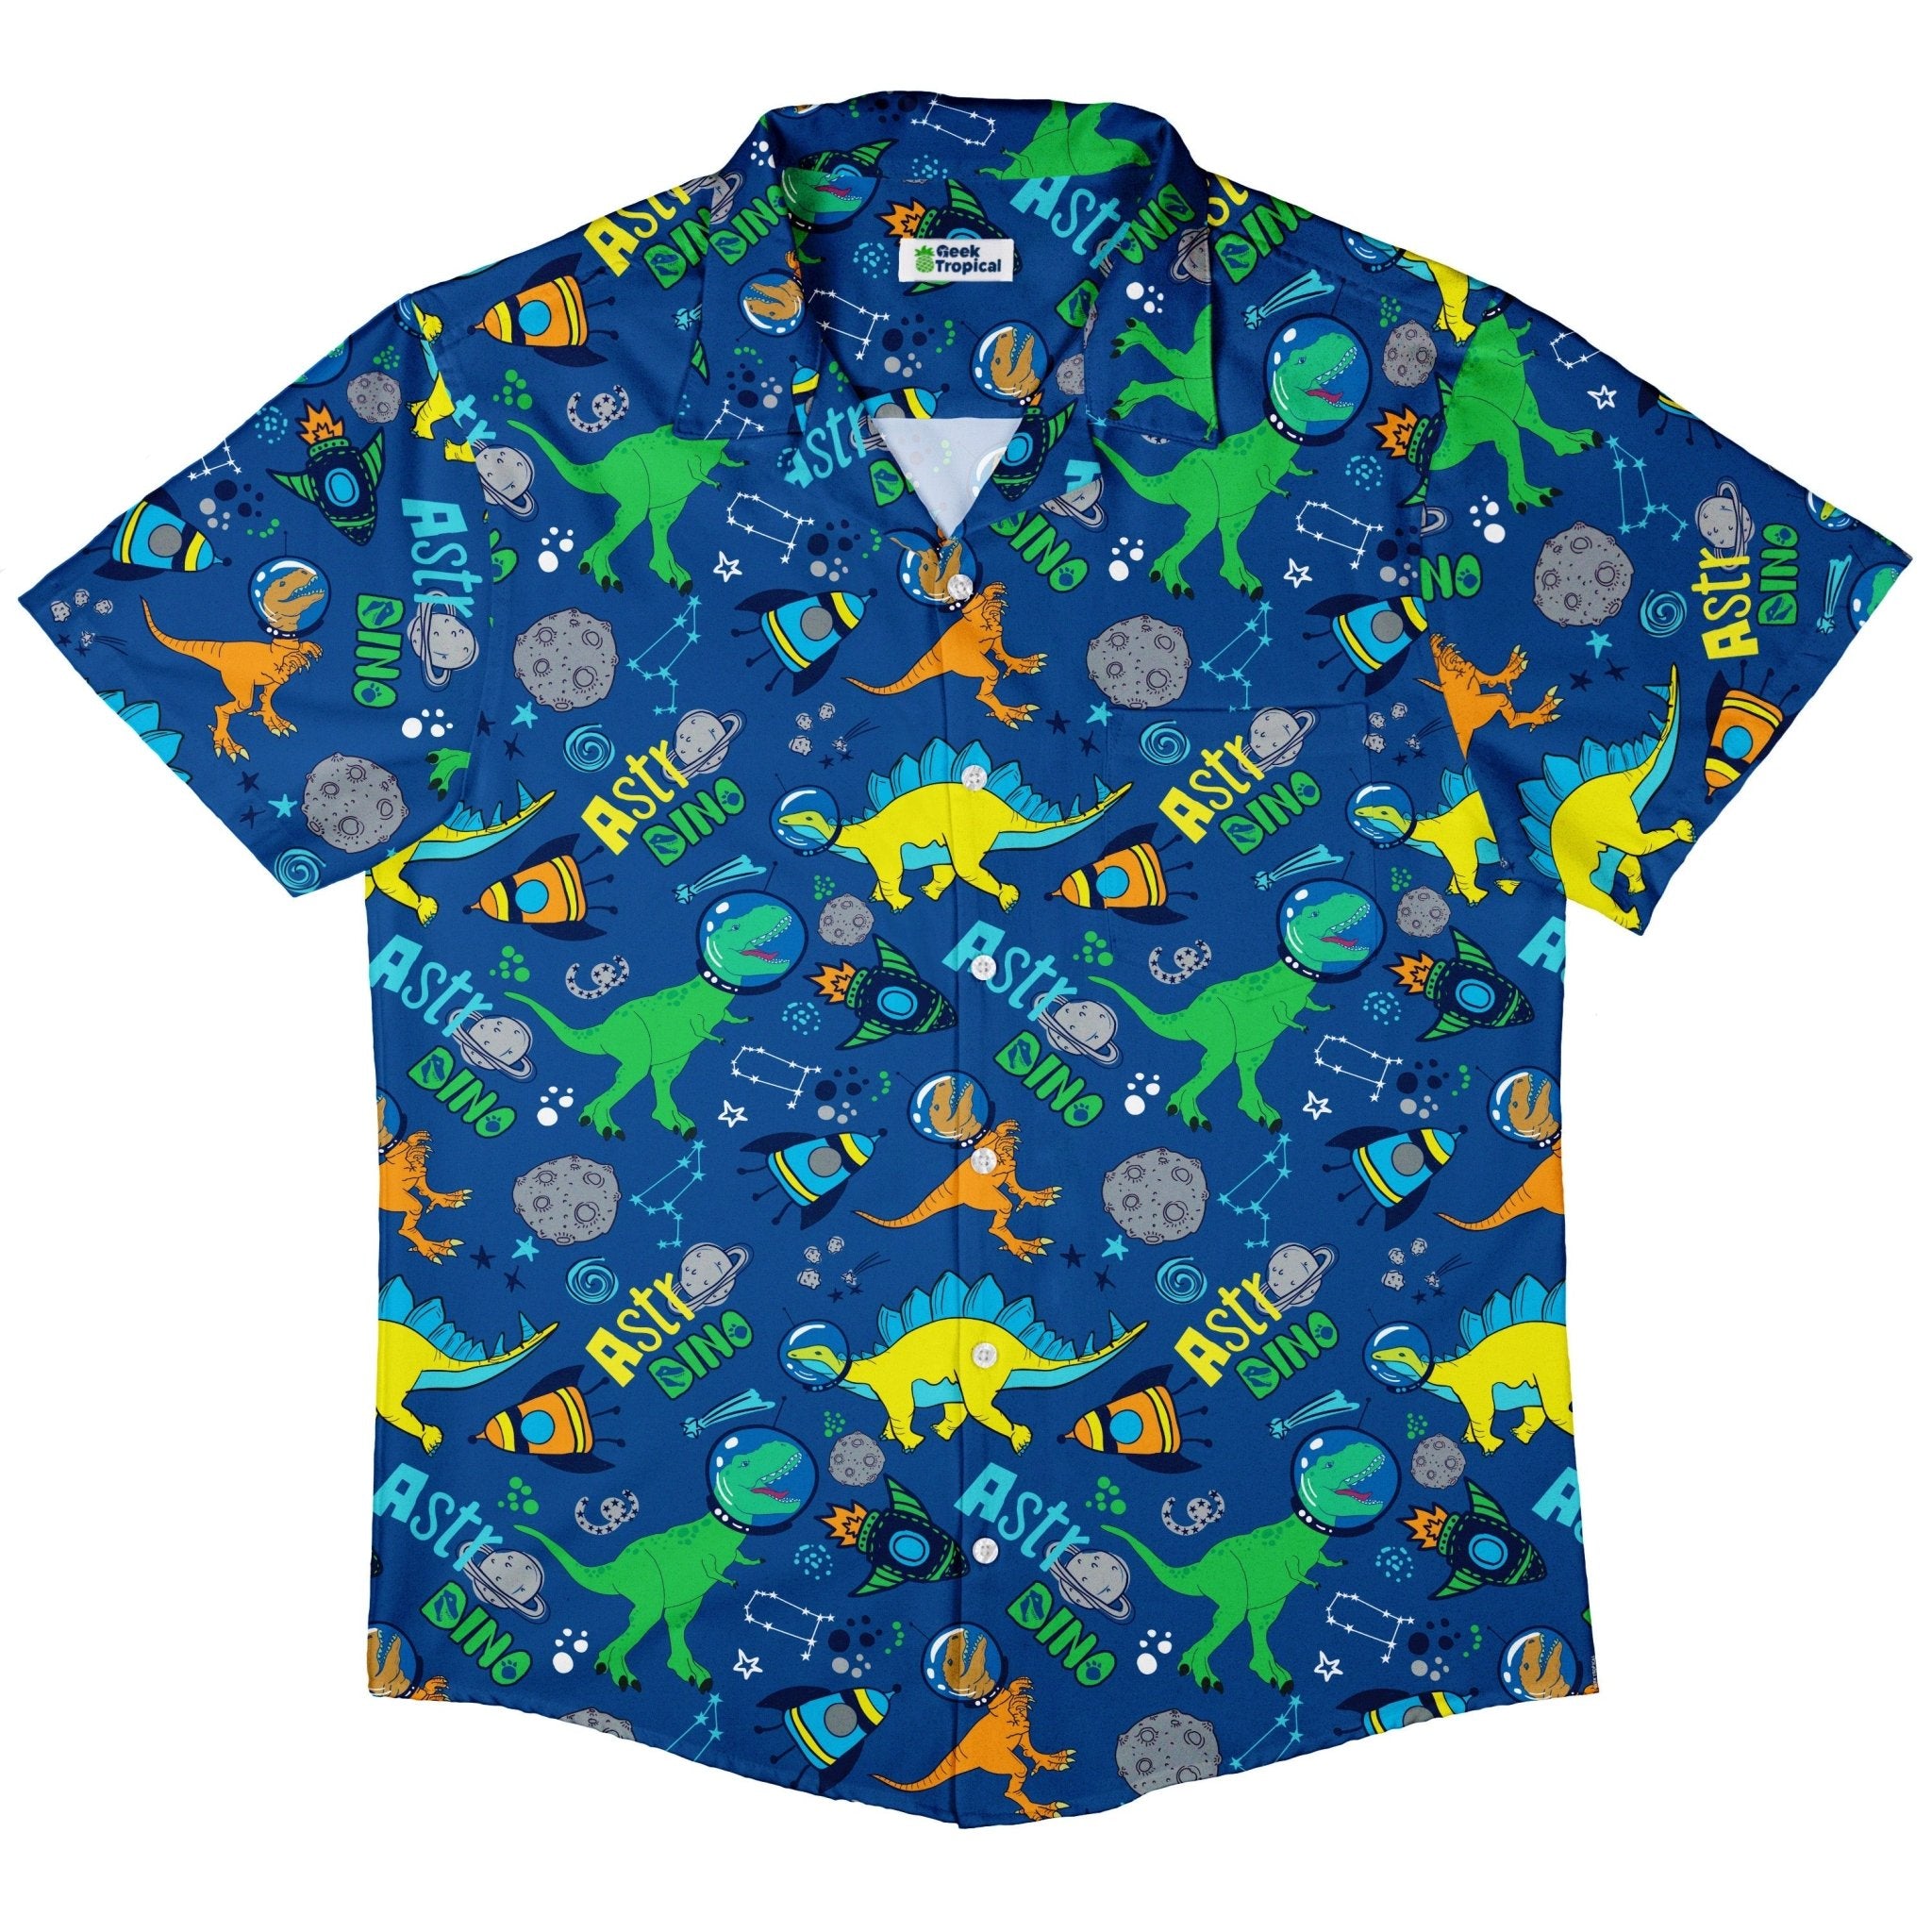 Astro Dino Dinosaur Outer Space Blue Button Up Shirt - adult sizing - dinosaur print - Maximalist Patterns